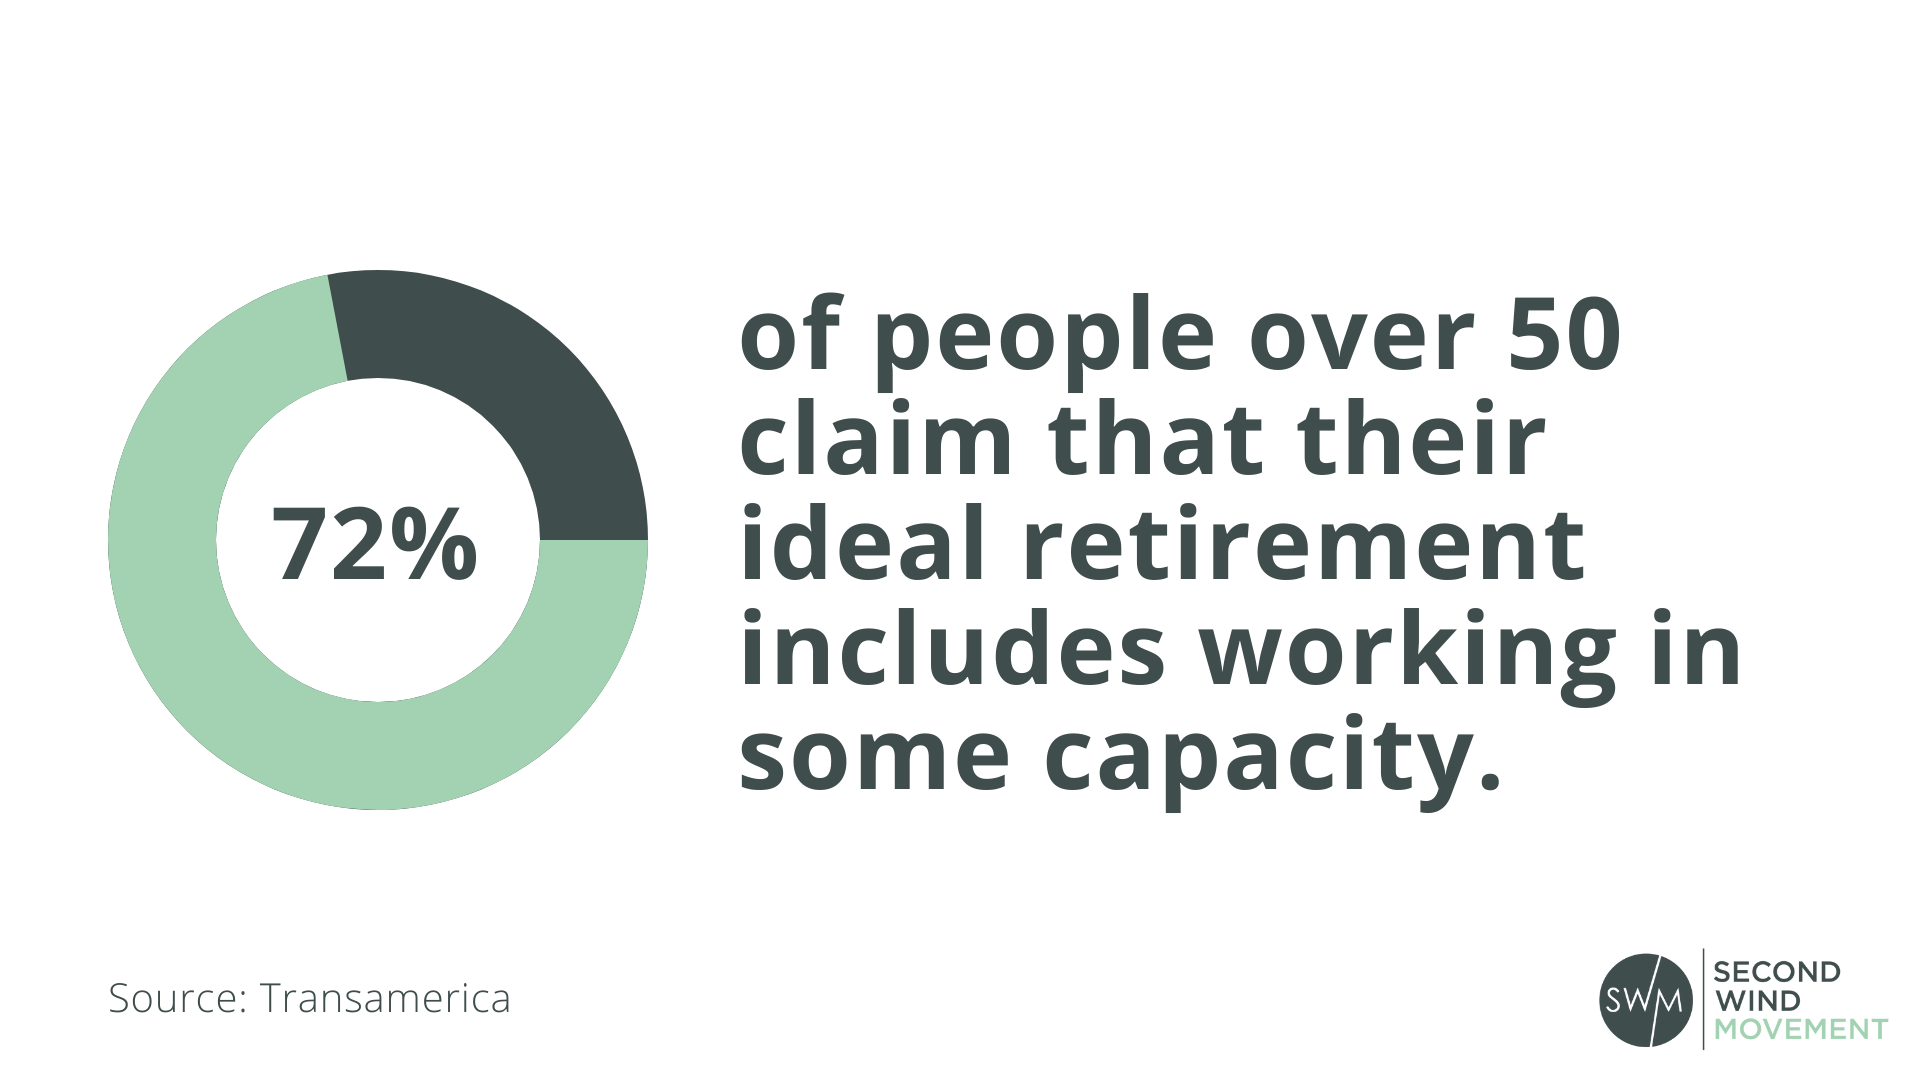 72% of people over 50 claim that their ideal retirement includes working in some capacity